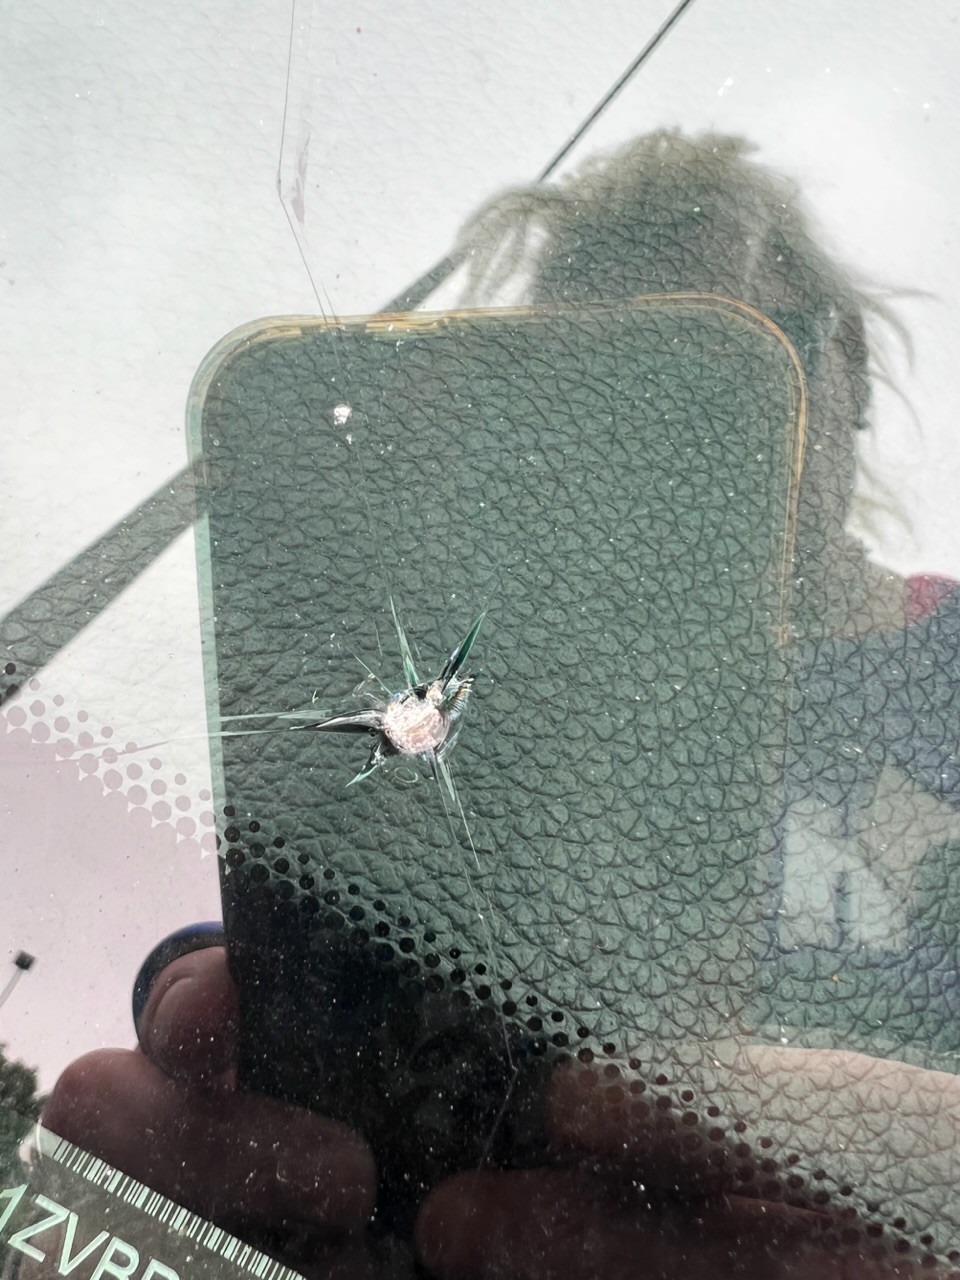 Bullet hole in the windshield, possibly mother